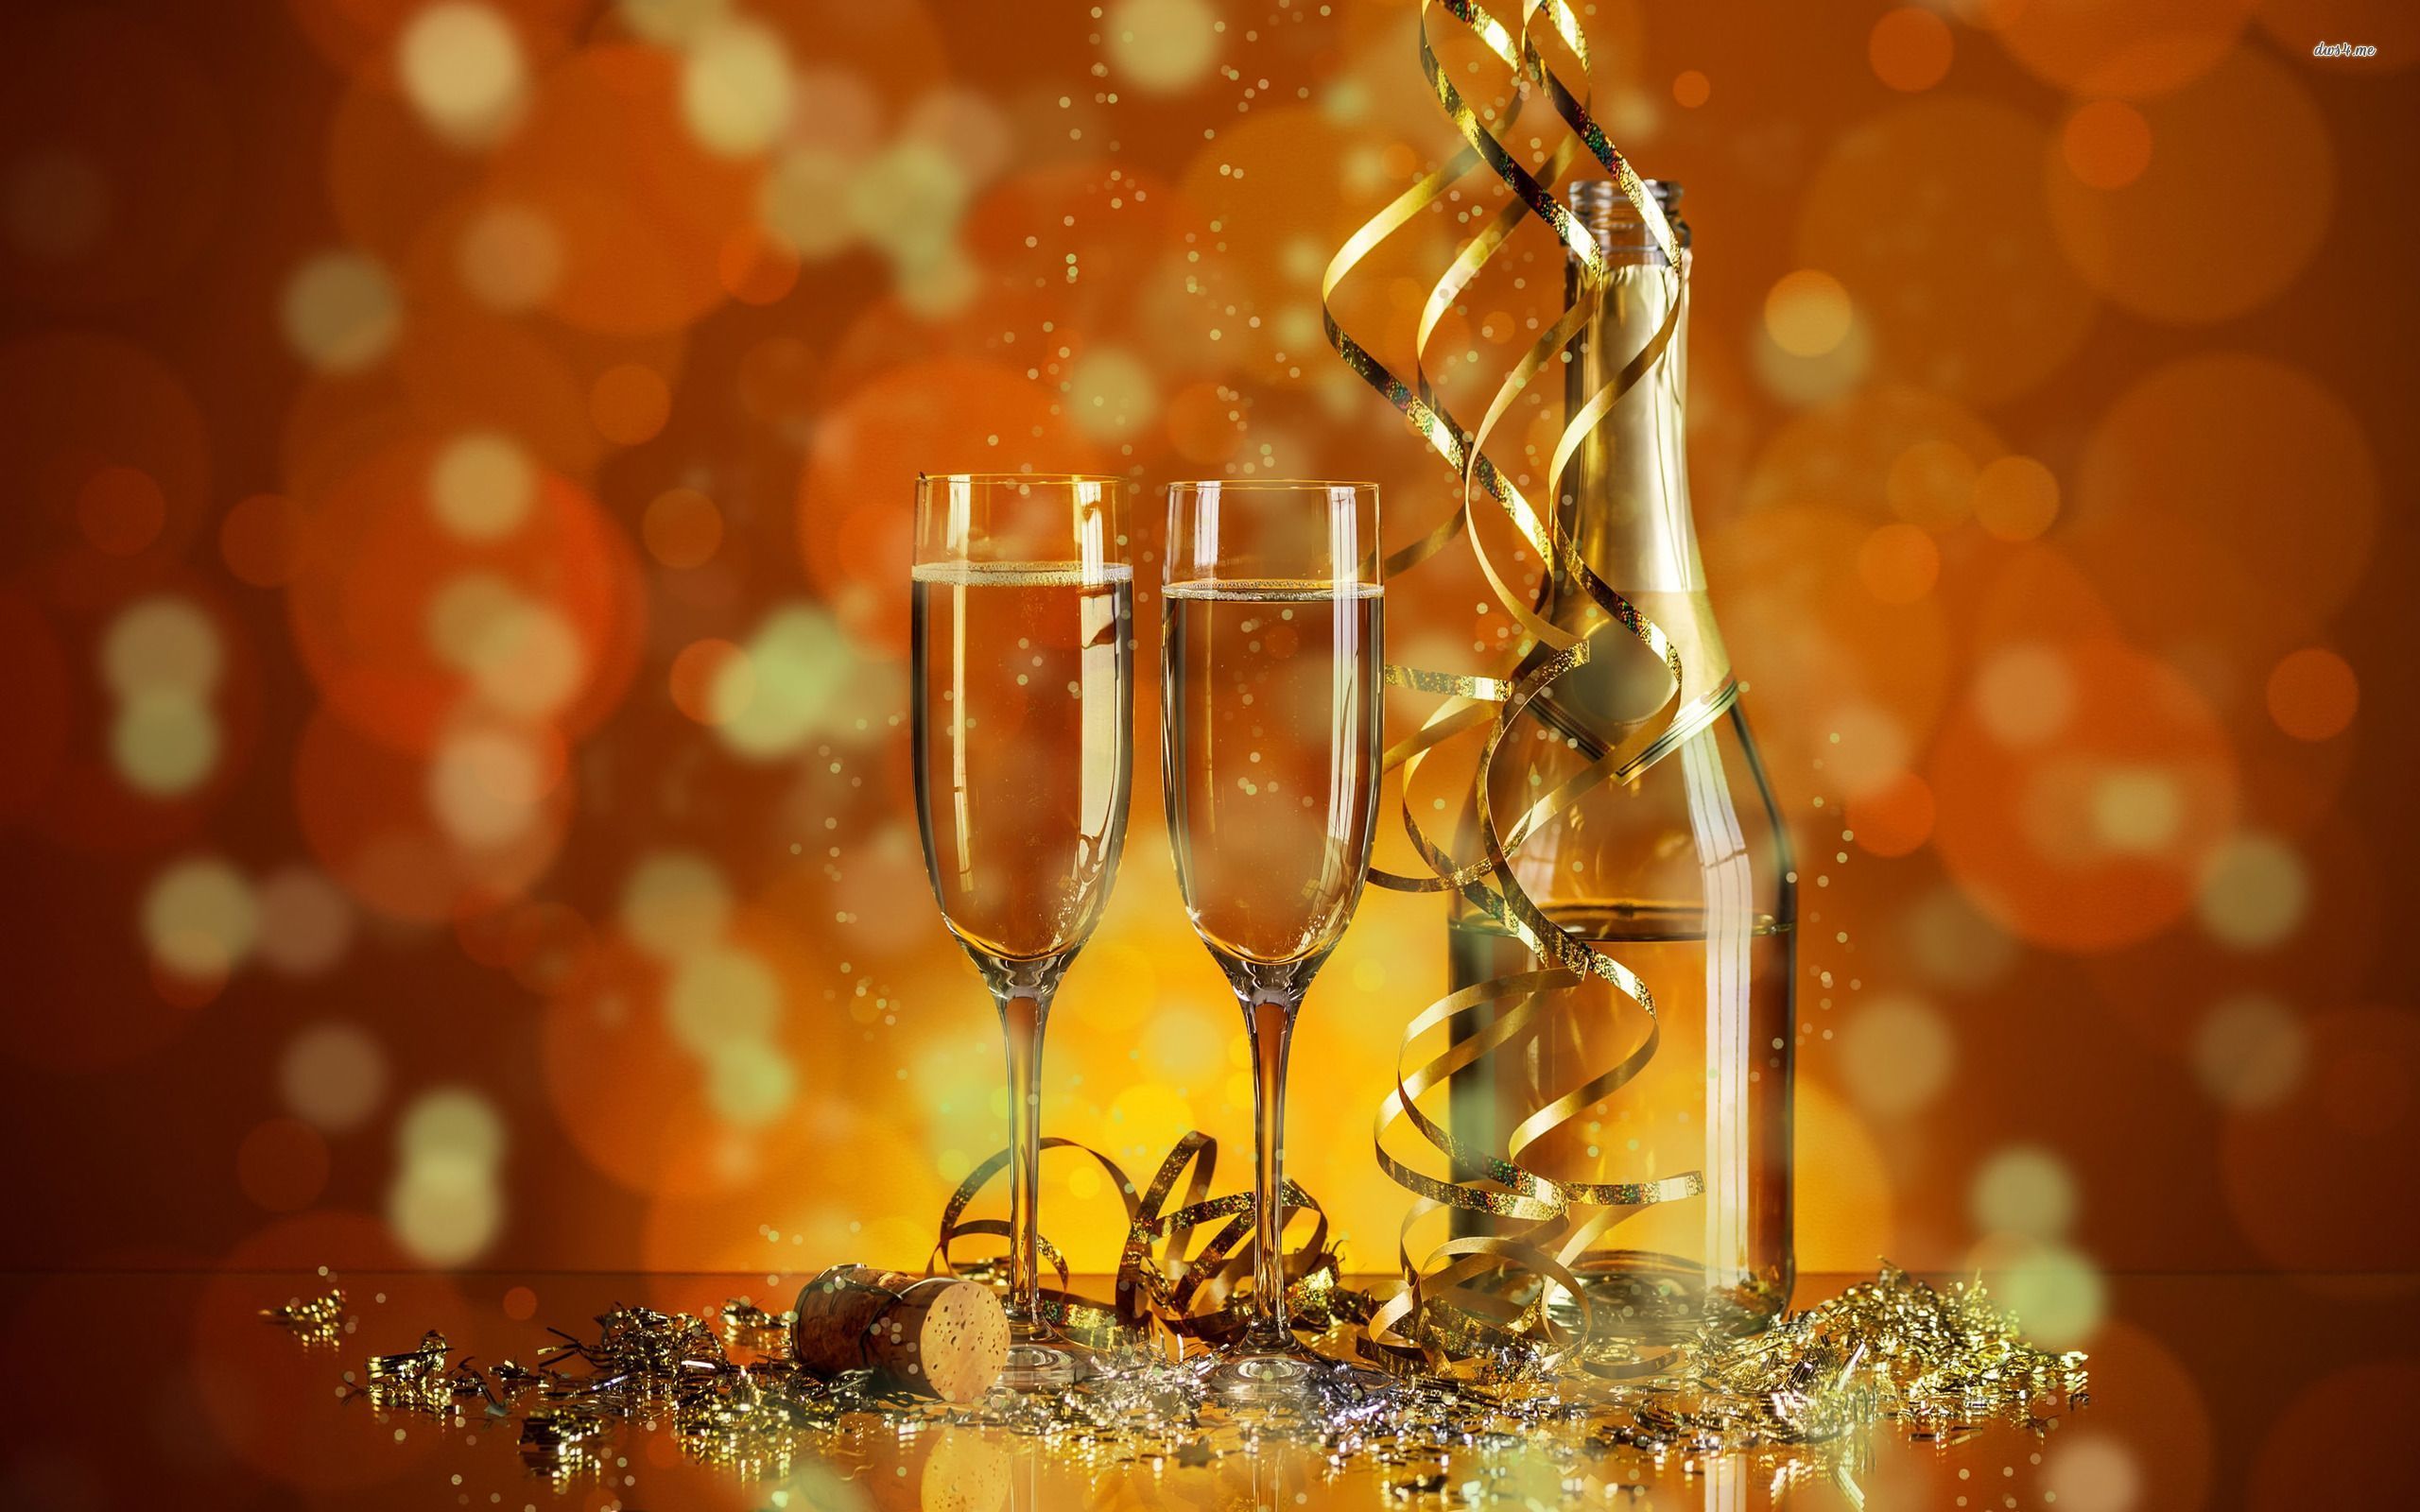 New Year celebrated with a glass of champagne wallpaper - Holiday ...